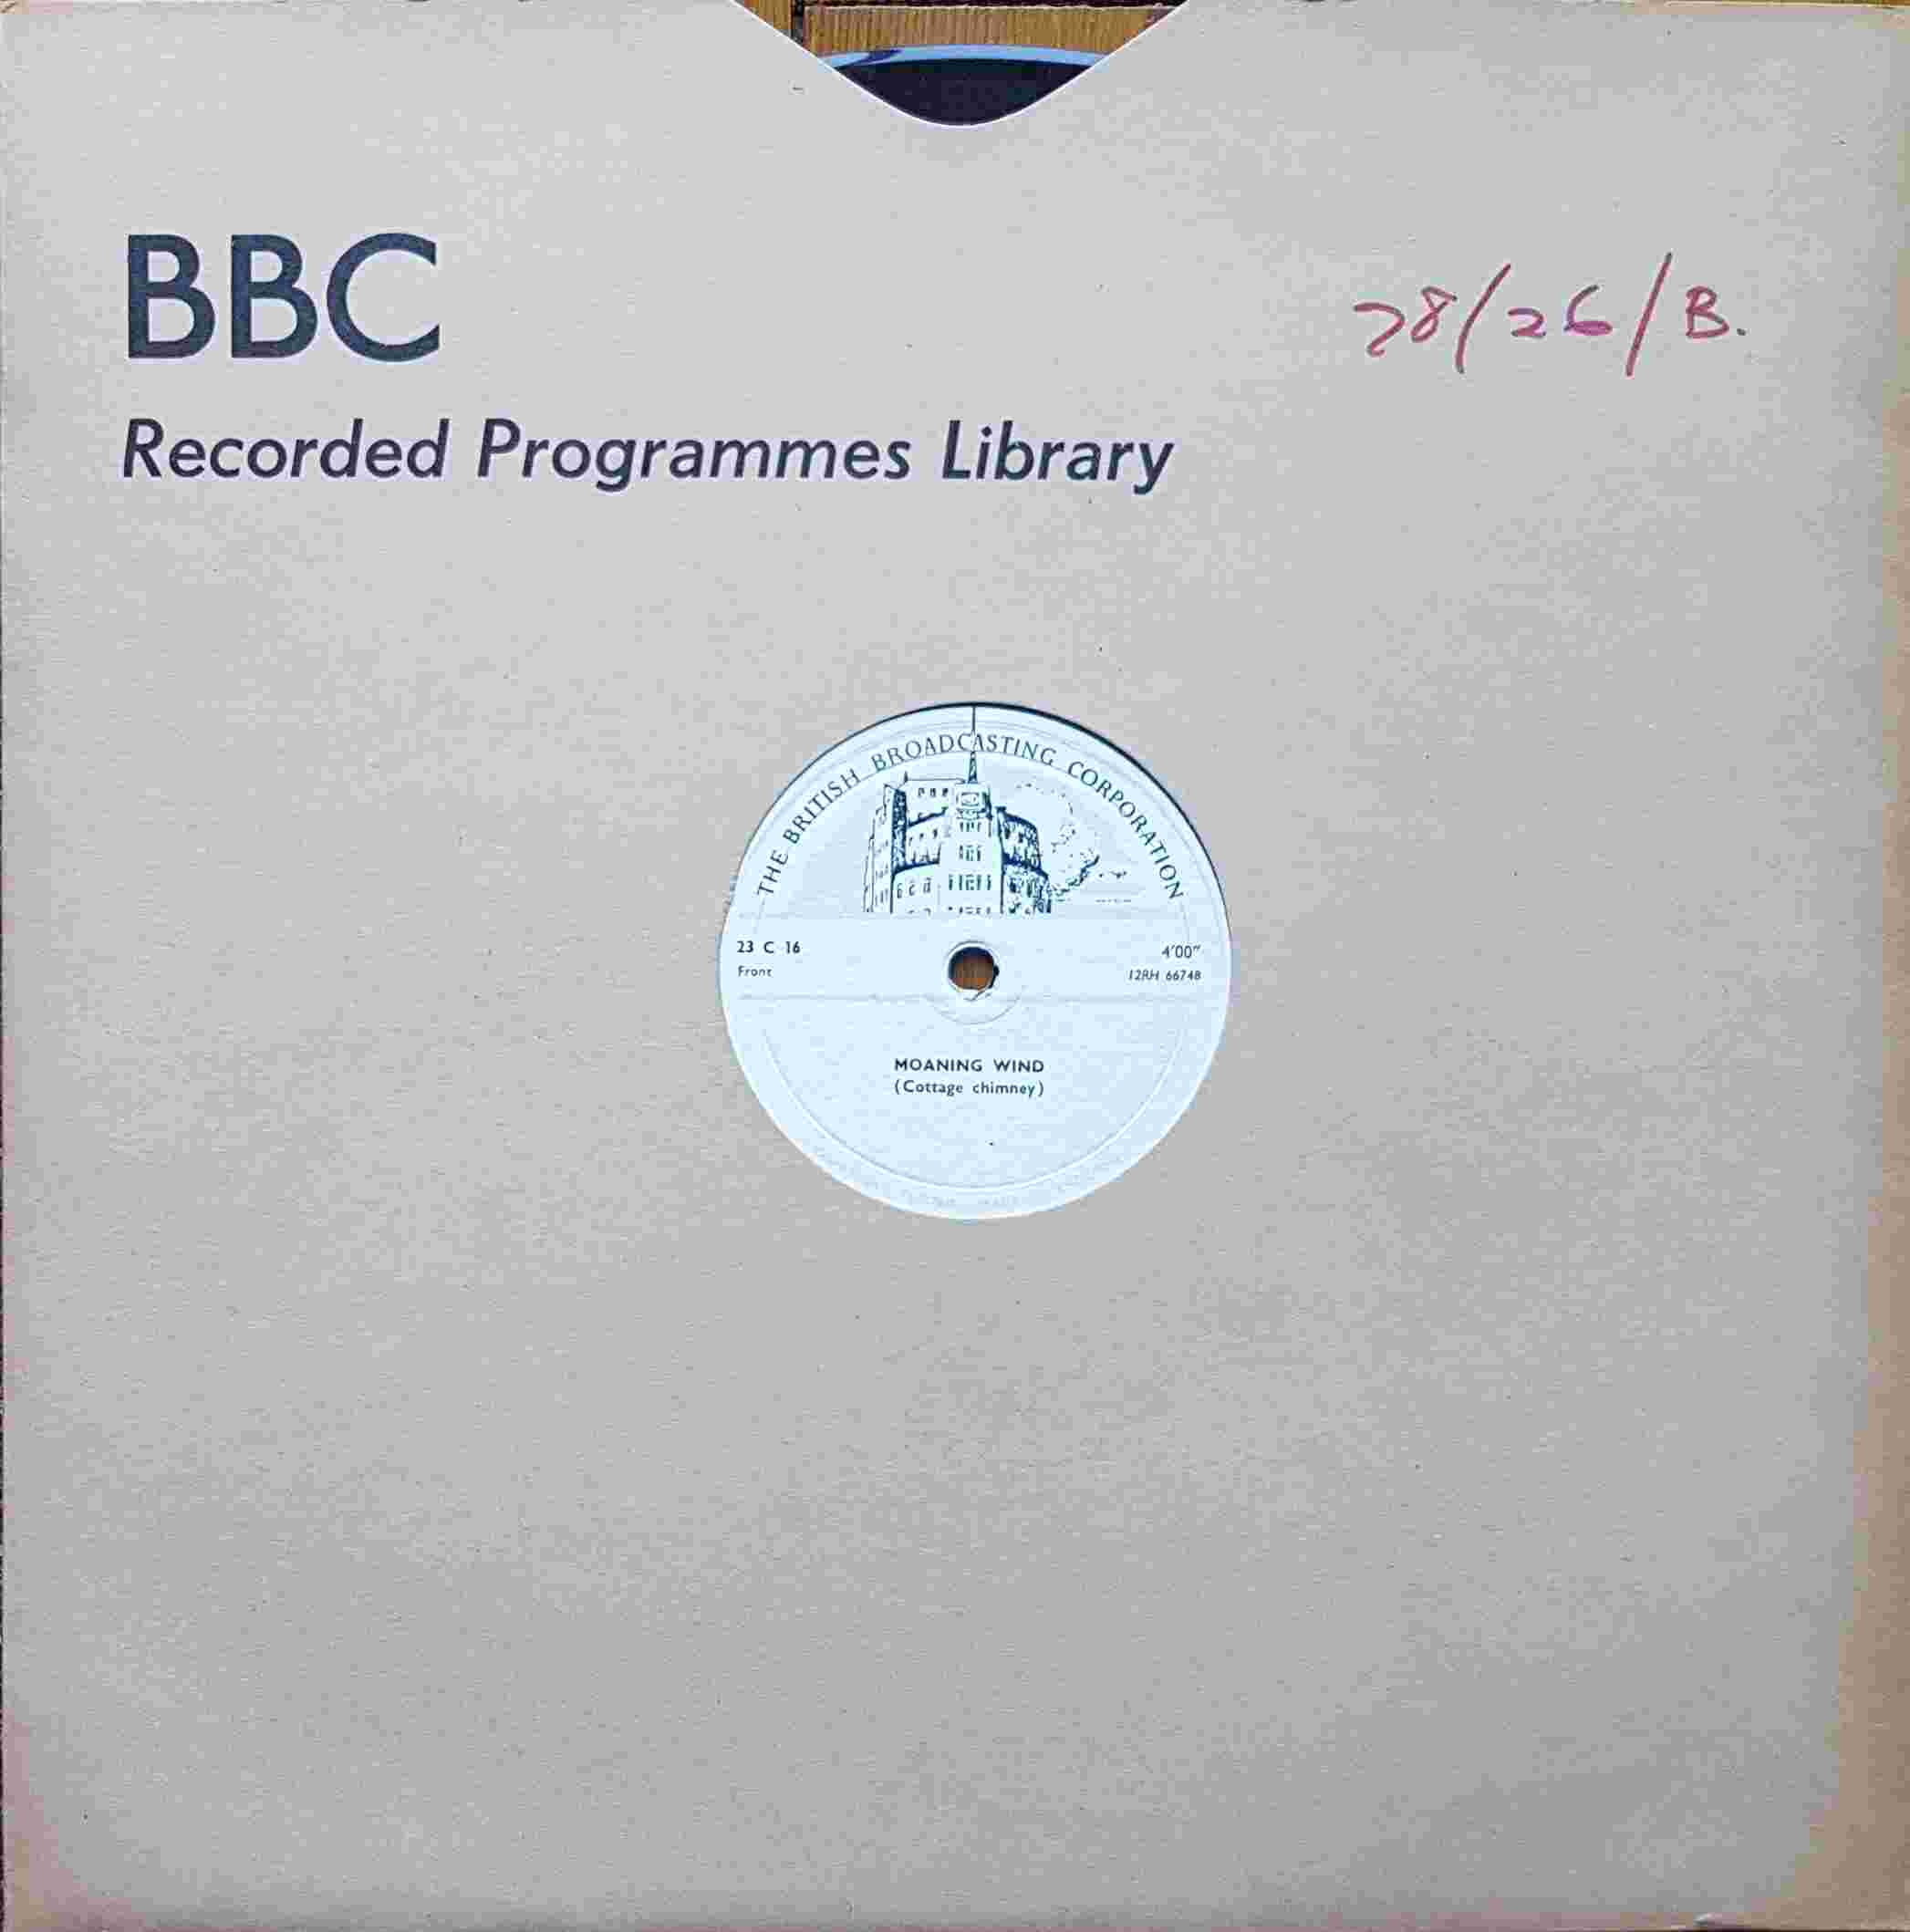 Picture of 23 C 16 Wind by artist Not registered from the BBC 78 - Records and Tapes library